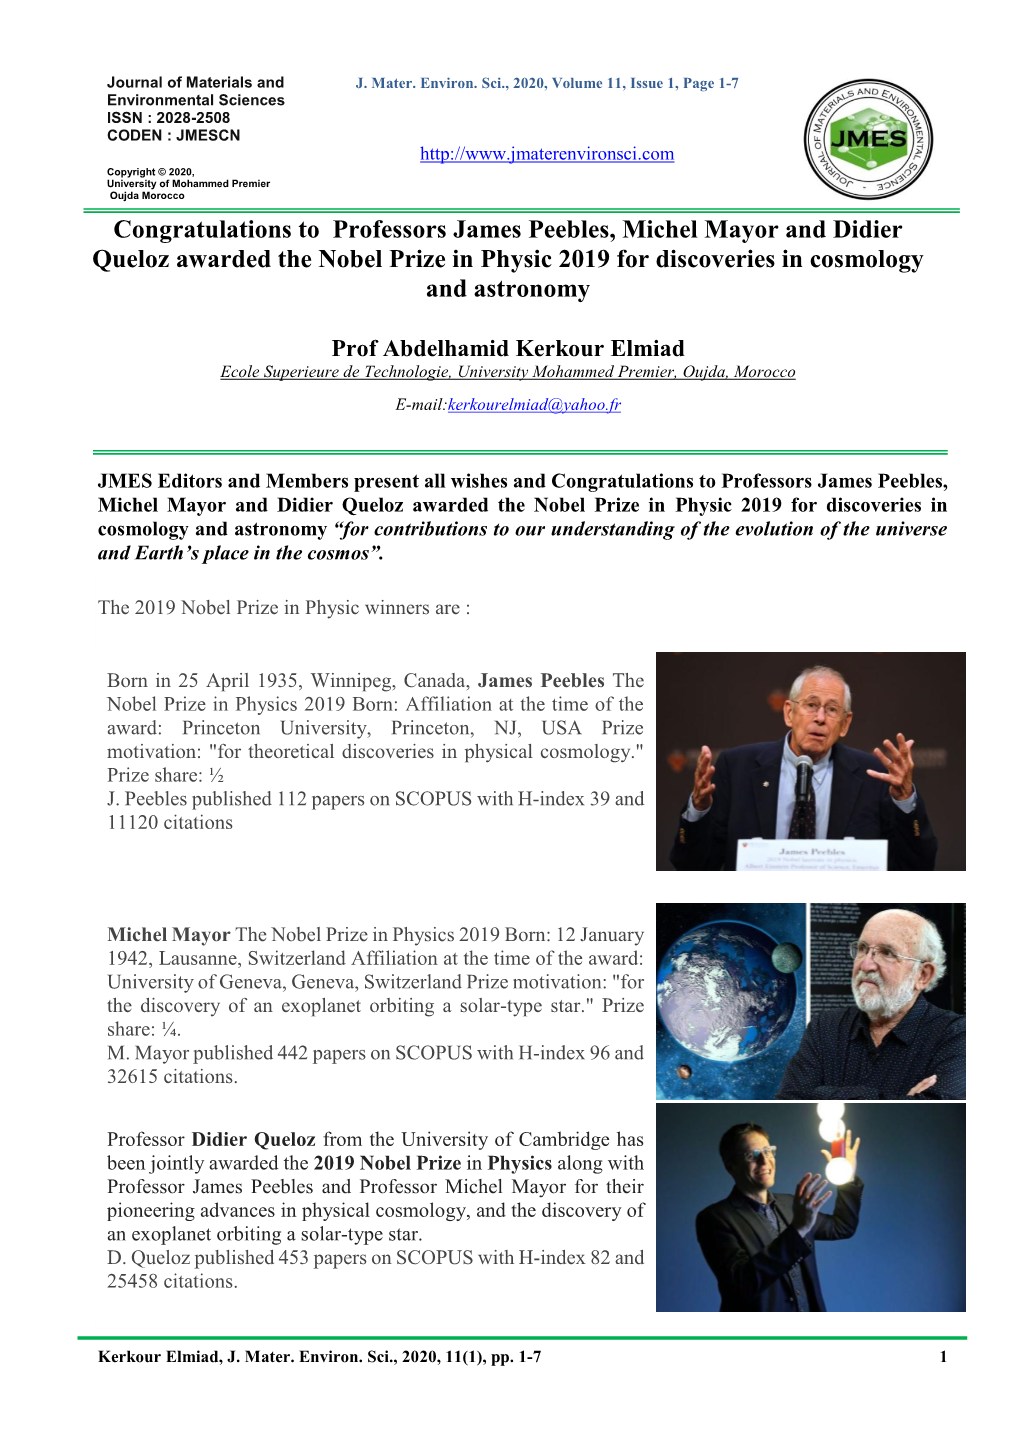 Congratulations to Professors James Peebles, Michel Mayor and Didier Queloz Awarded the Nobel Prize in Physic 2019 for Discoveries in Cosmology and Astronomy